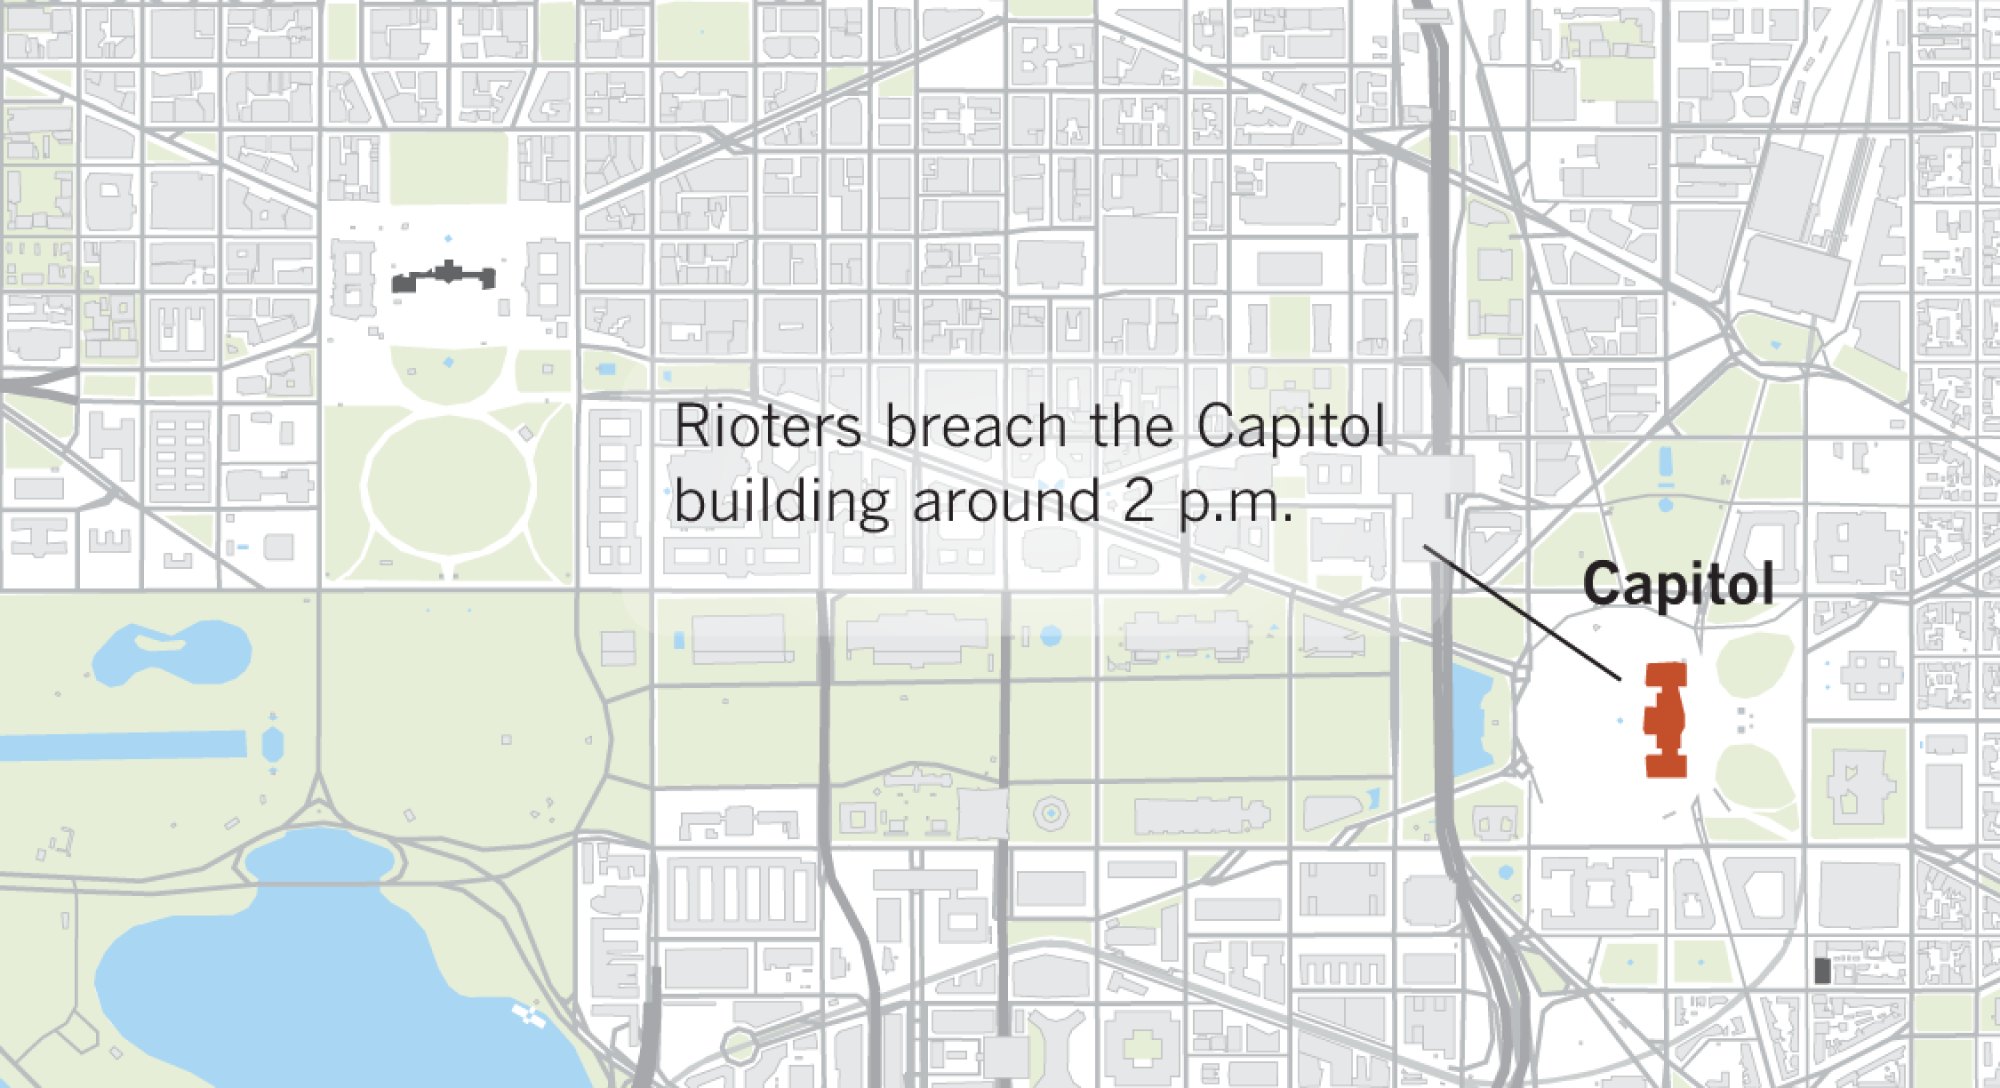 Map shows the Capitol building where rioters entered on Wednesday.